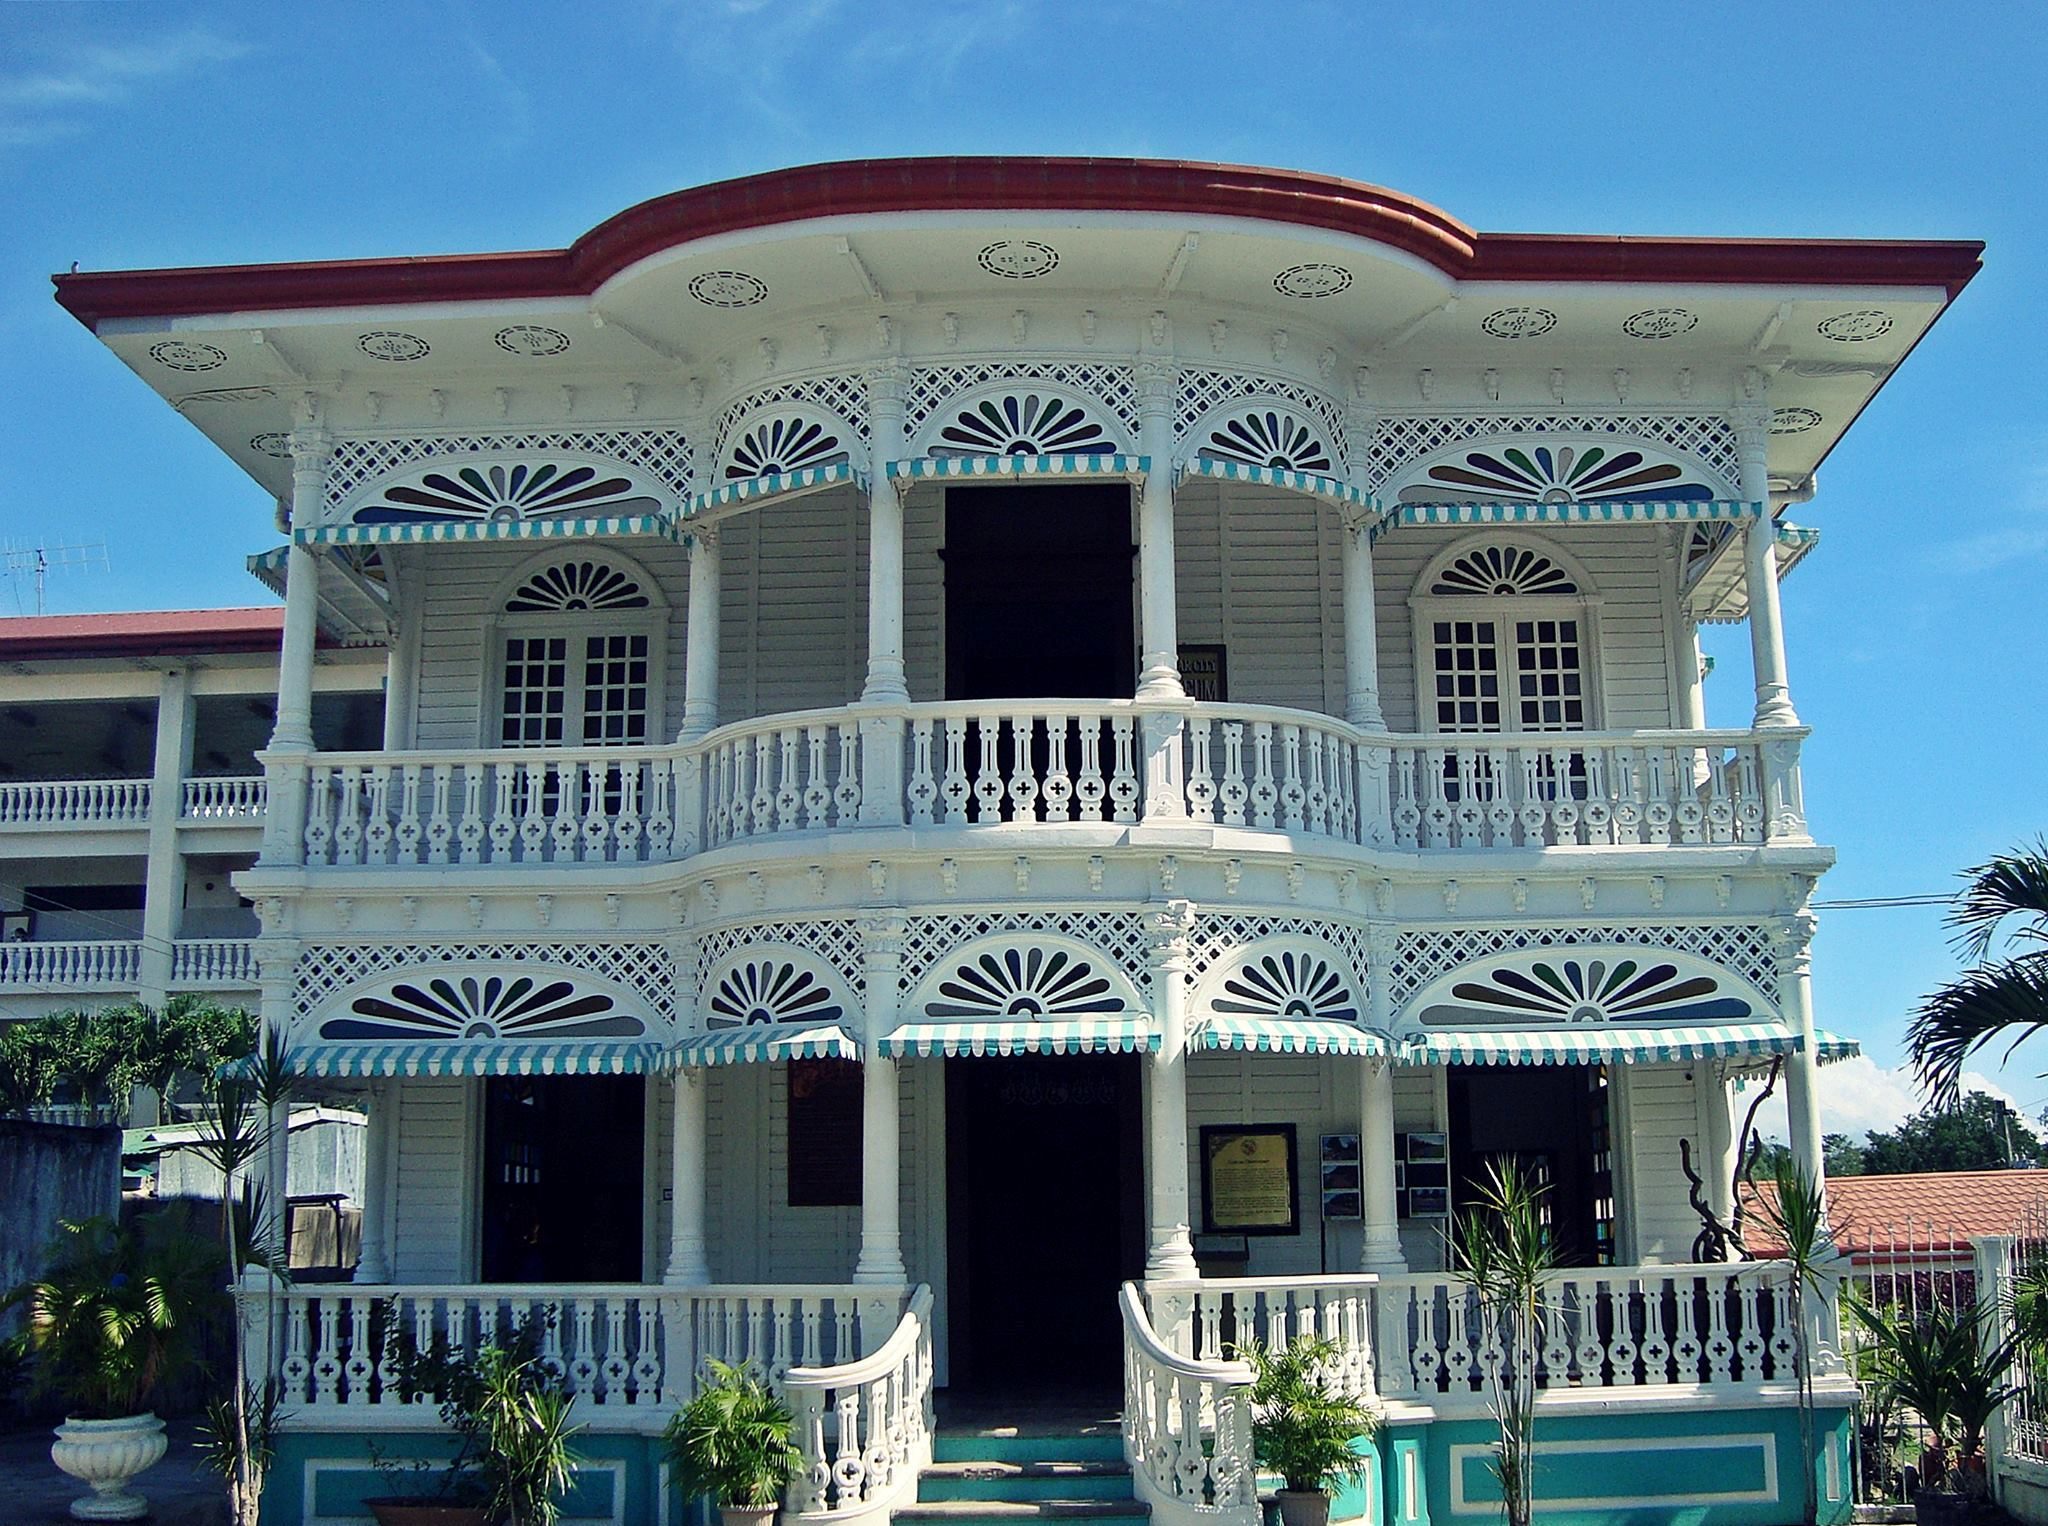 CARCAR. Known as Cebu’s heritage city, Carcar is home to beautiful old structures like this. Photo by Ephraim Arriesgado 